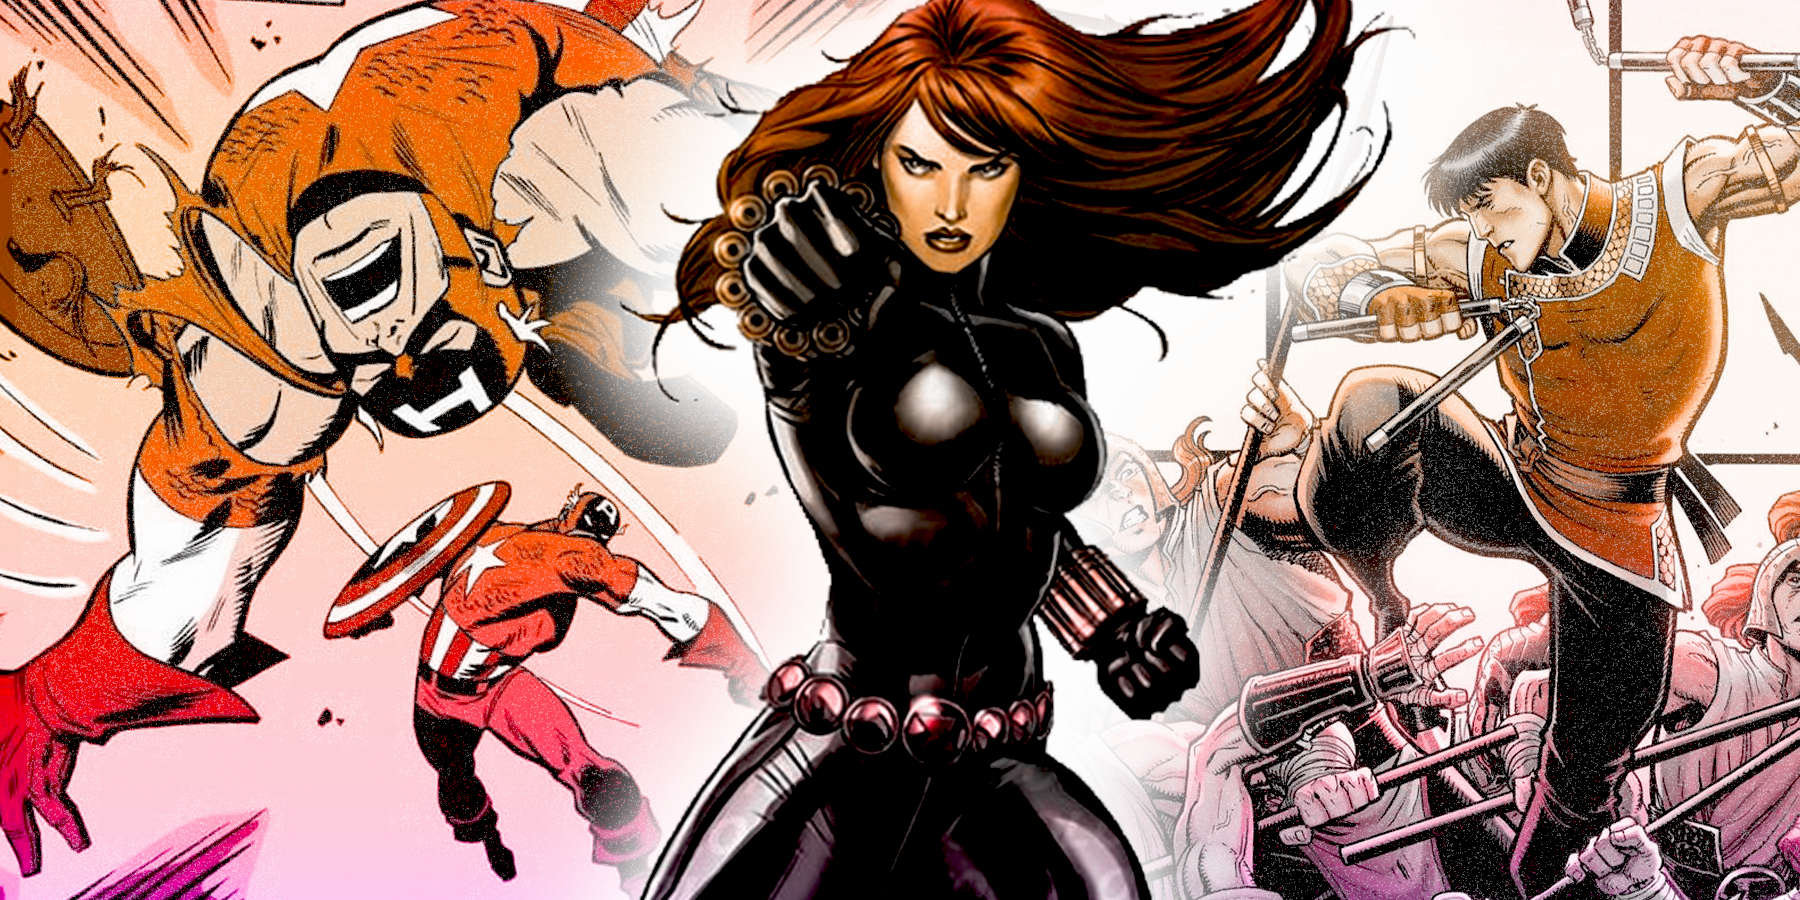 Black Widow split image with Captain America and Shang-Chi fighting